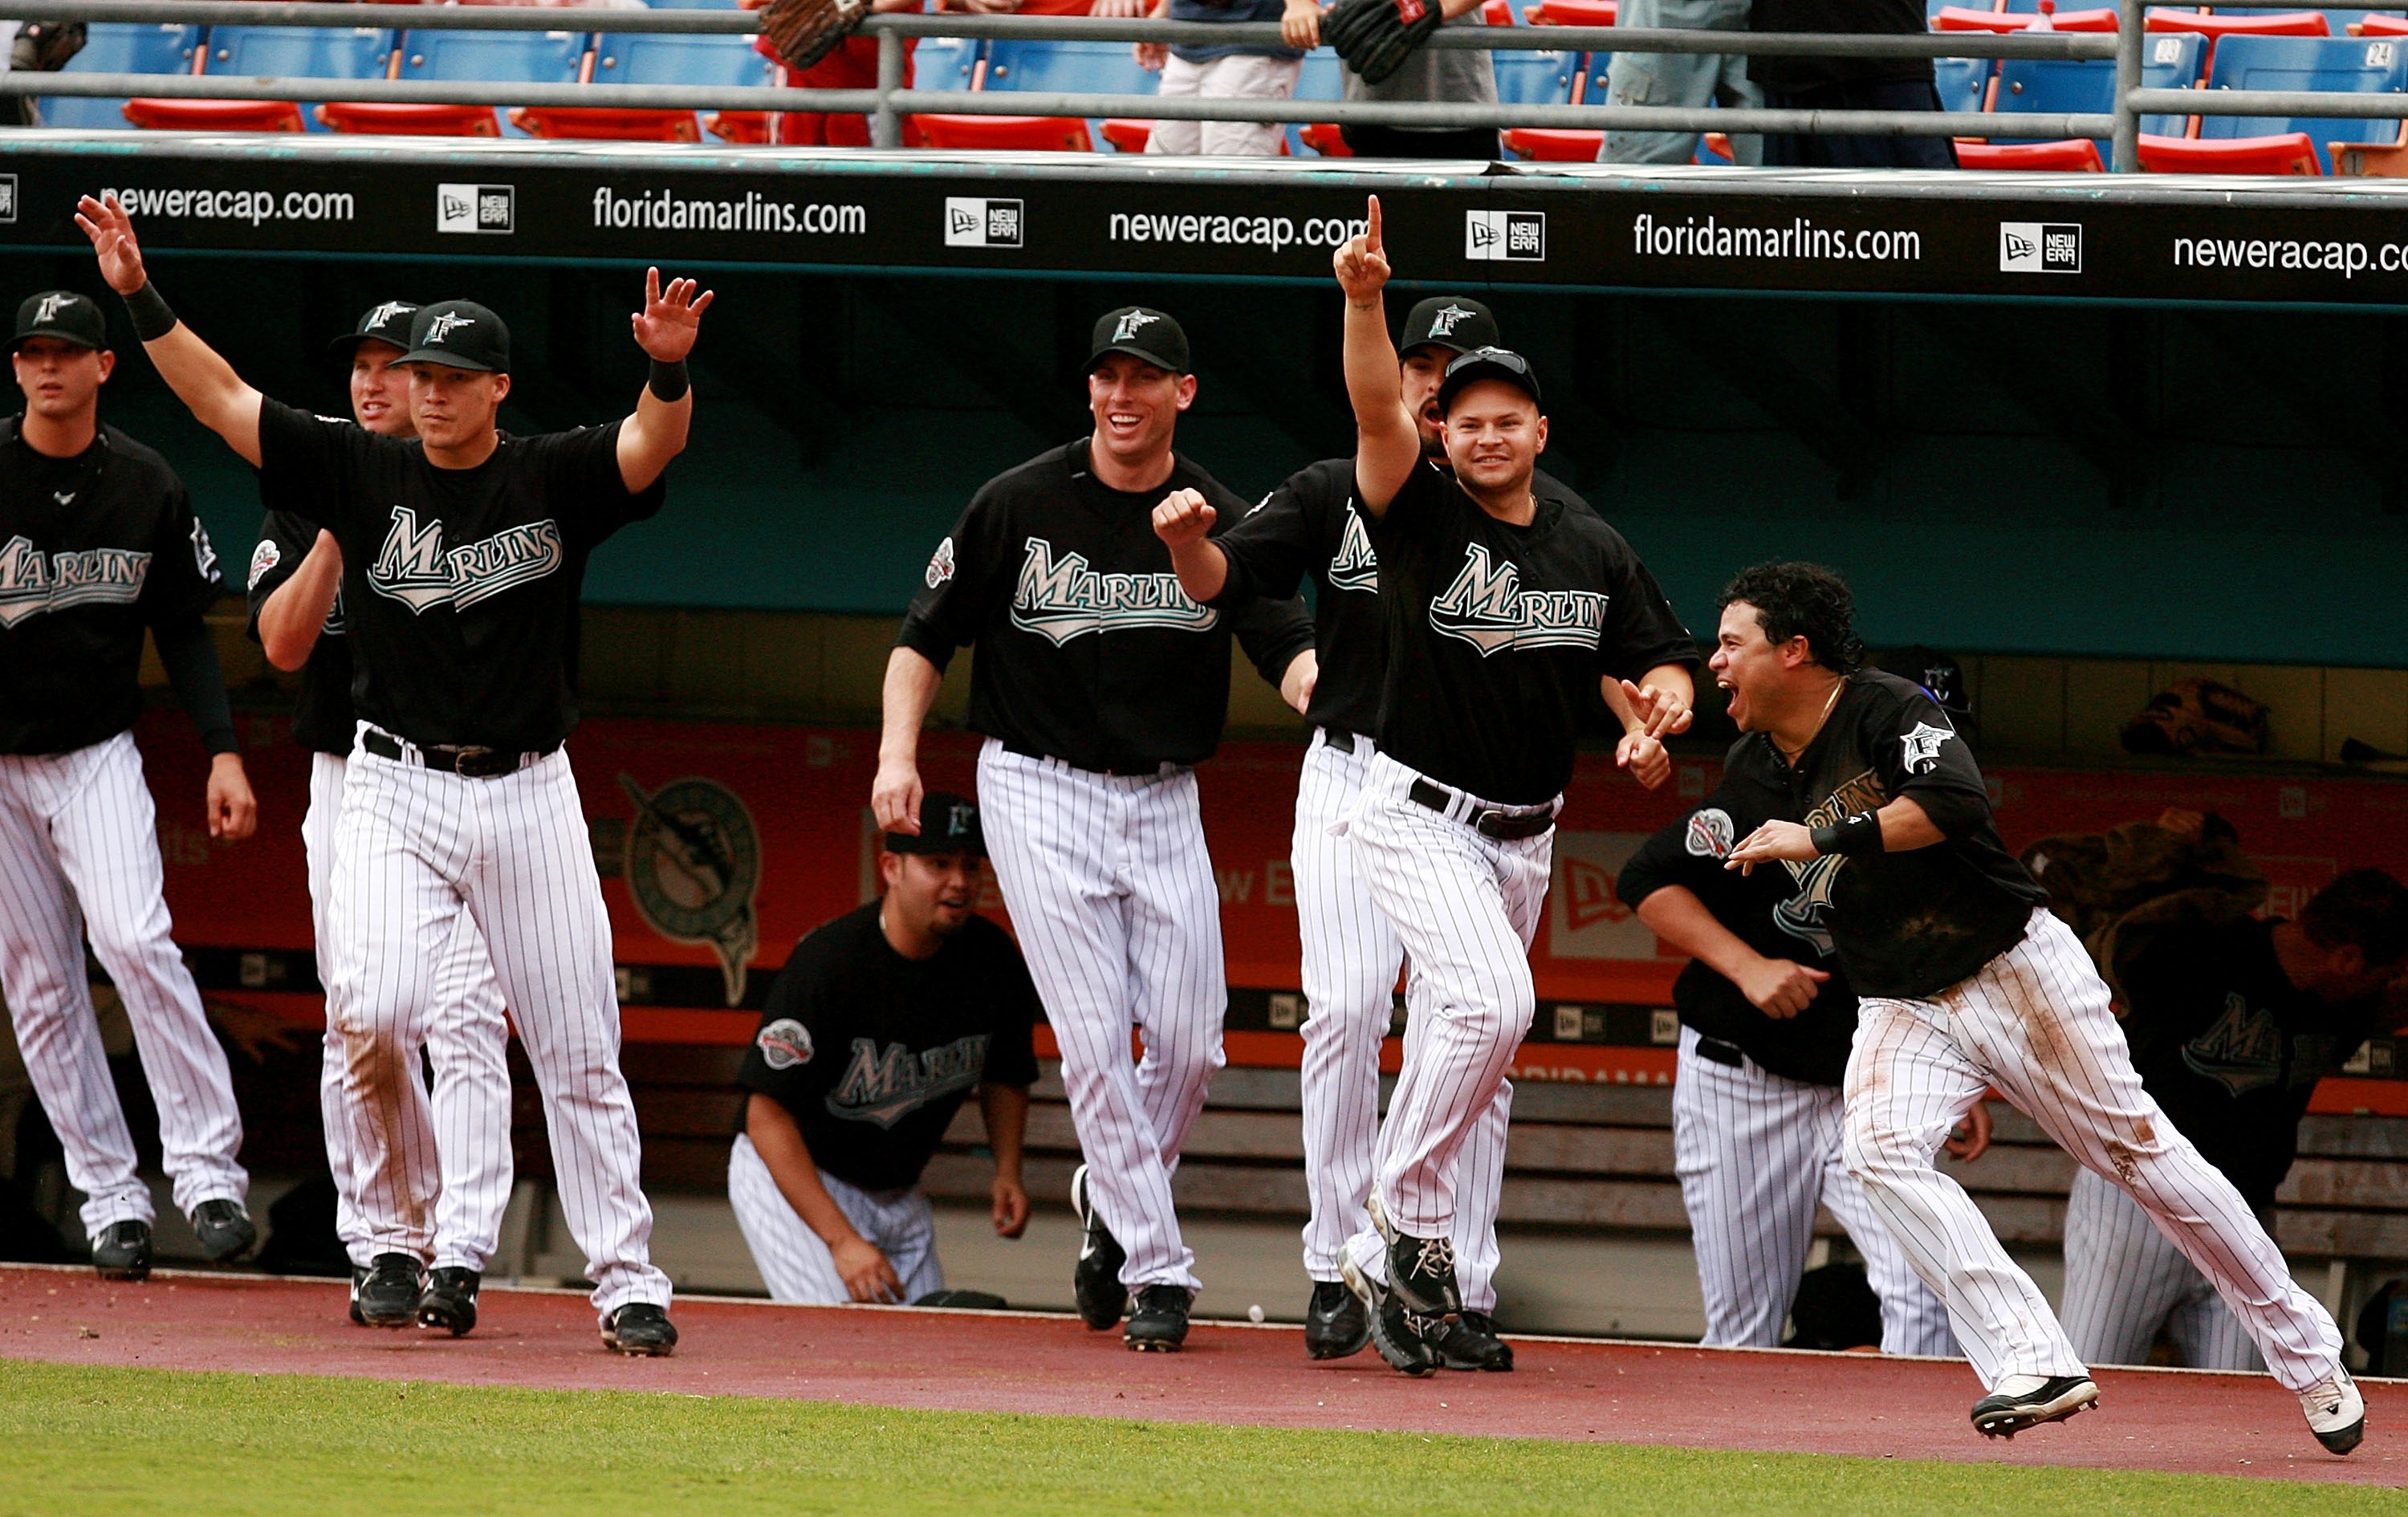 The bench of the Florida Marlins celebrates a game-winning hit by Josh Willingham #14 in the tenth inning against the Atlanta Braves at Dolphin Stadium July 1, 2007 in Miami, Florida.